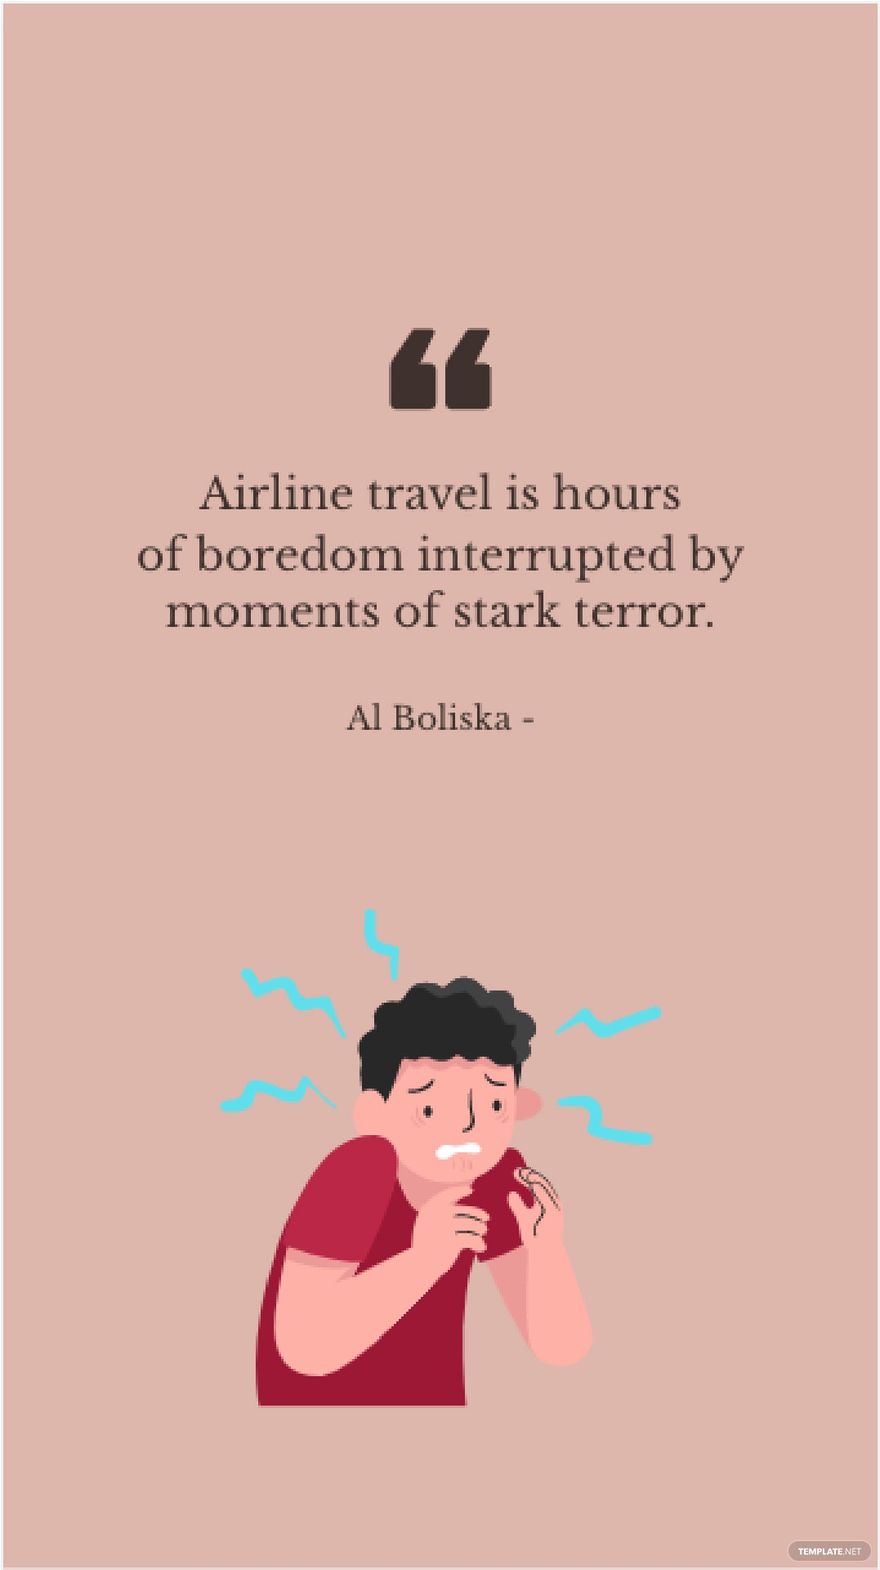 Free Al Boliska - Airline travel is hours of boredom interrupted by moments of stark terror.